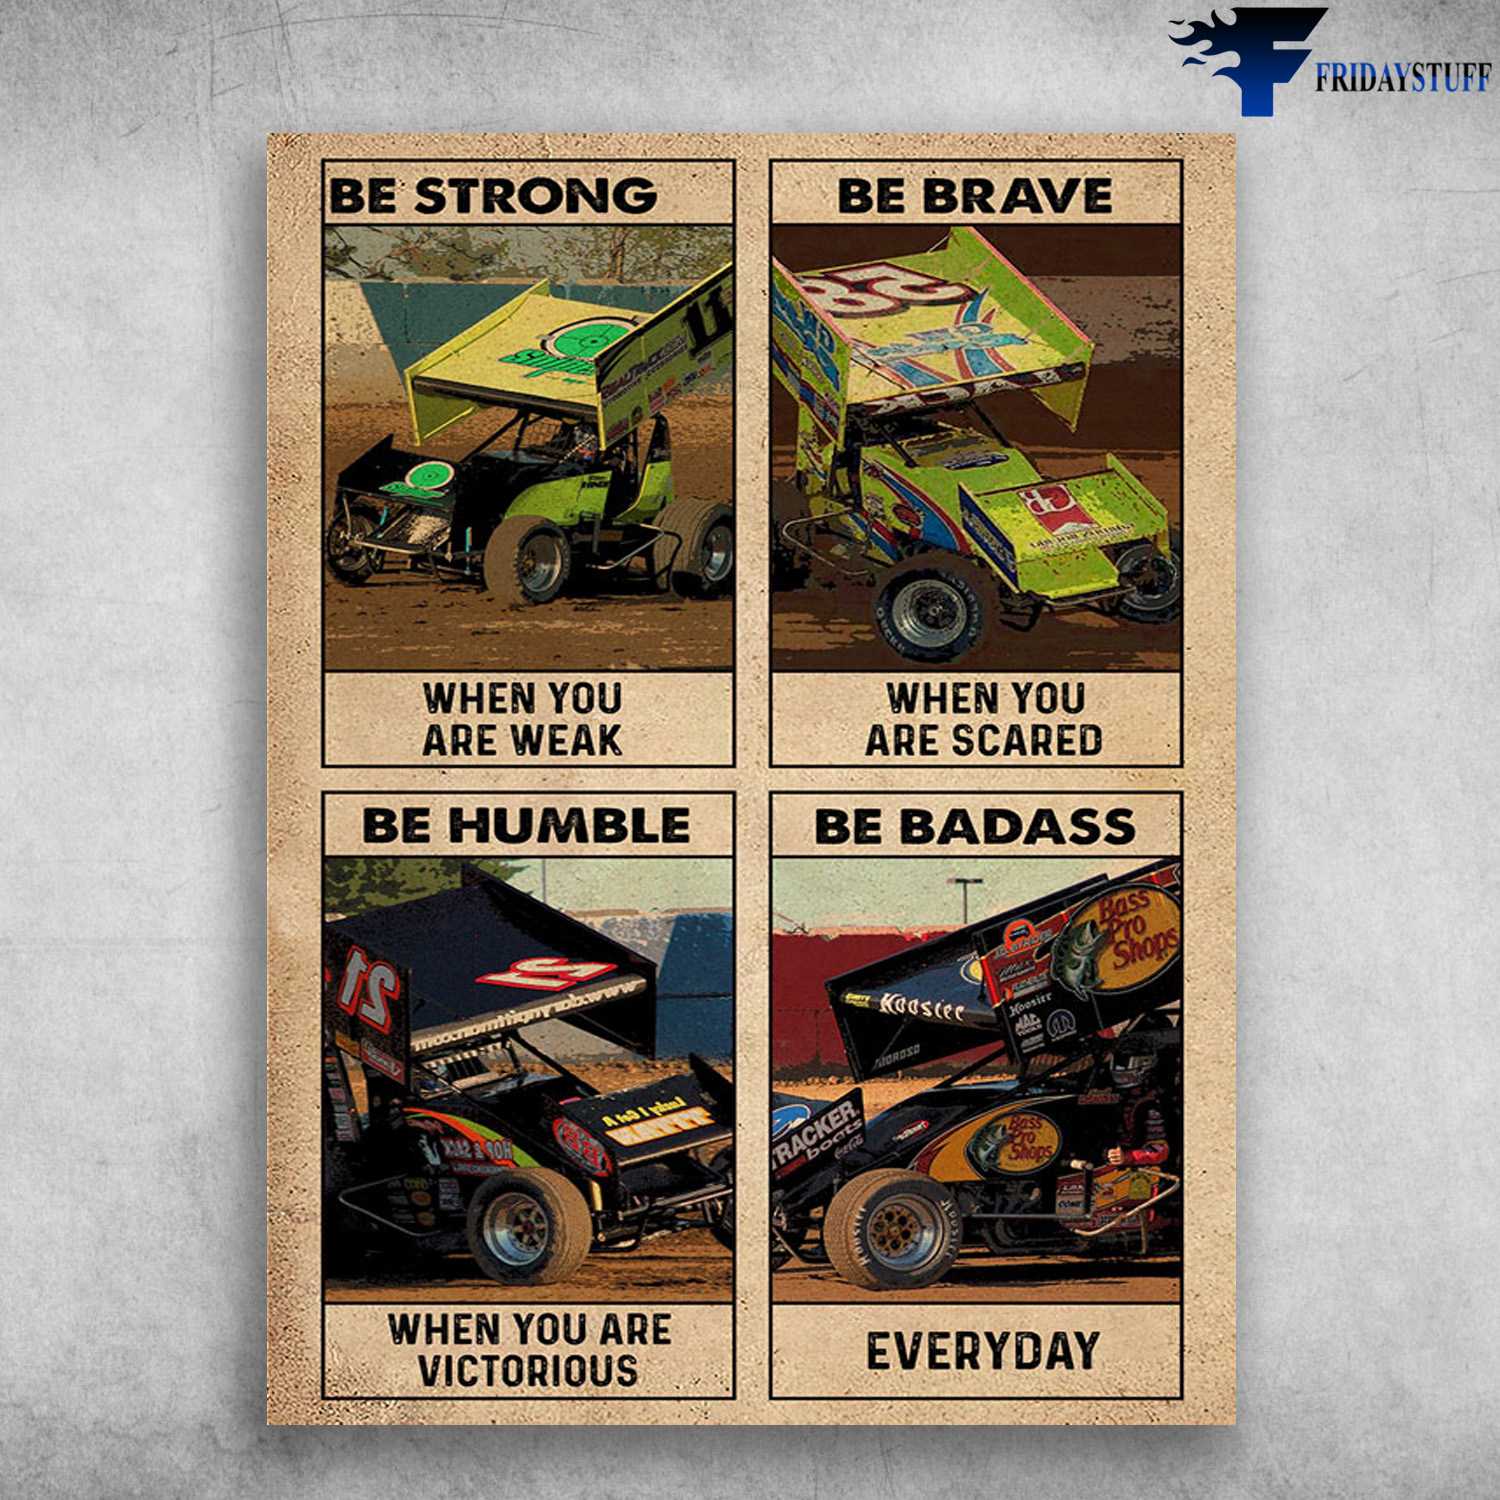 Dirtcar Poster, Dirtcar Races - Be Strong When You Are Weak, Be Brave When You Are Scared, Be Humble When You Are Victorious, Be Badass Everyday